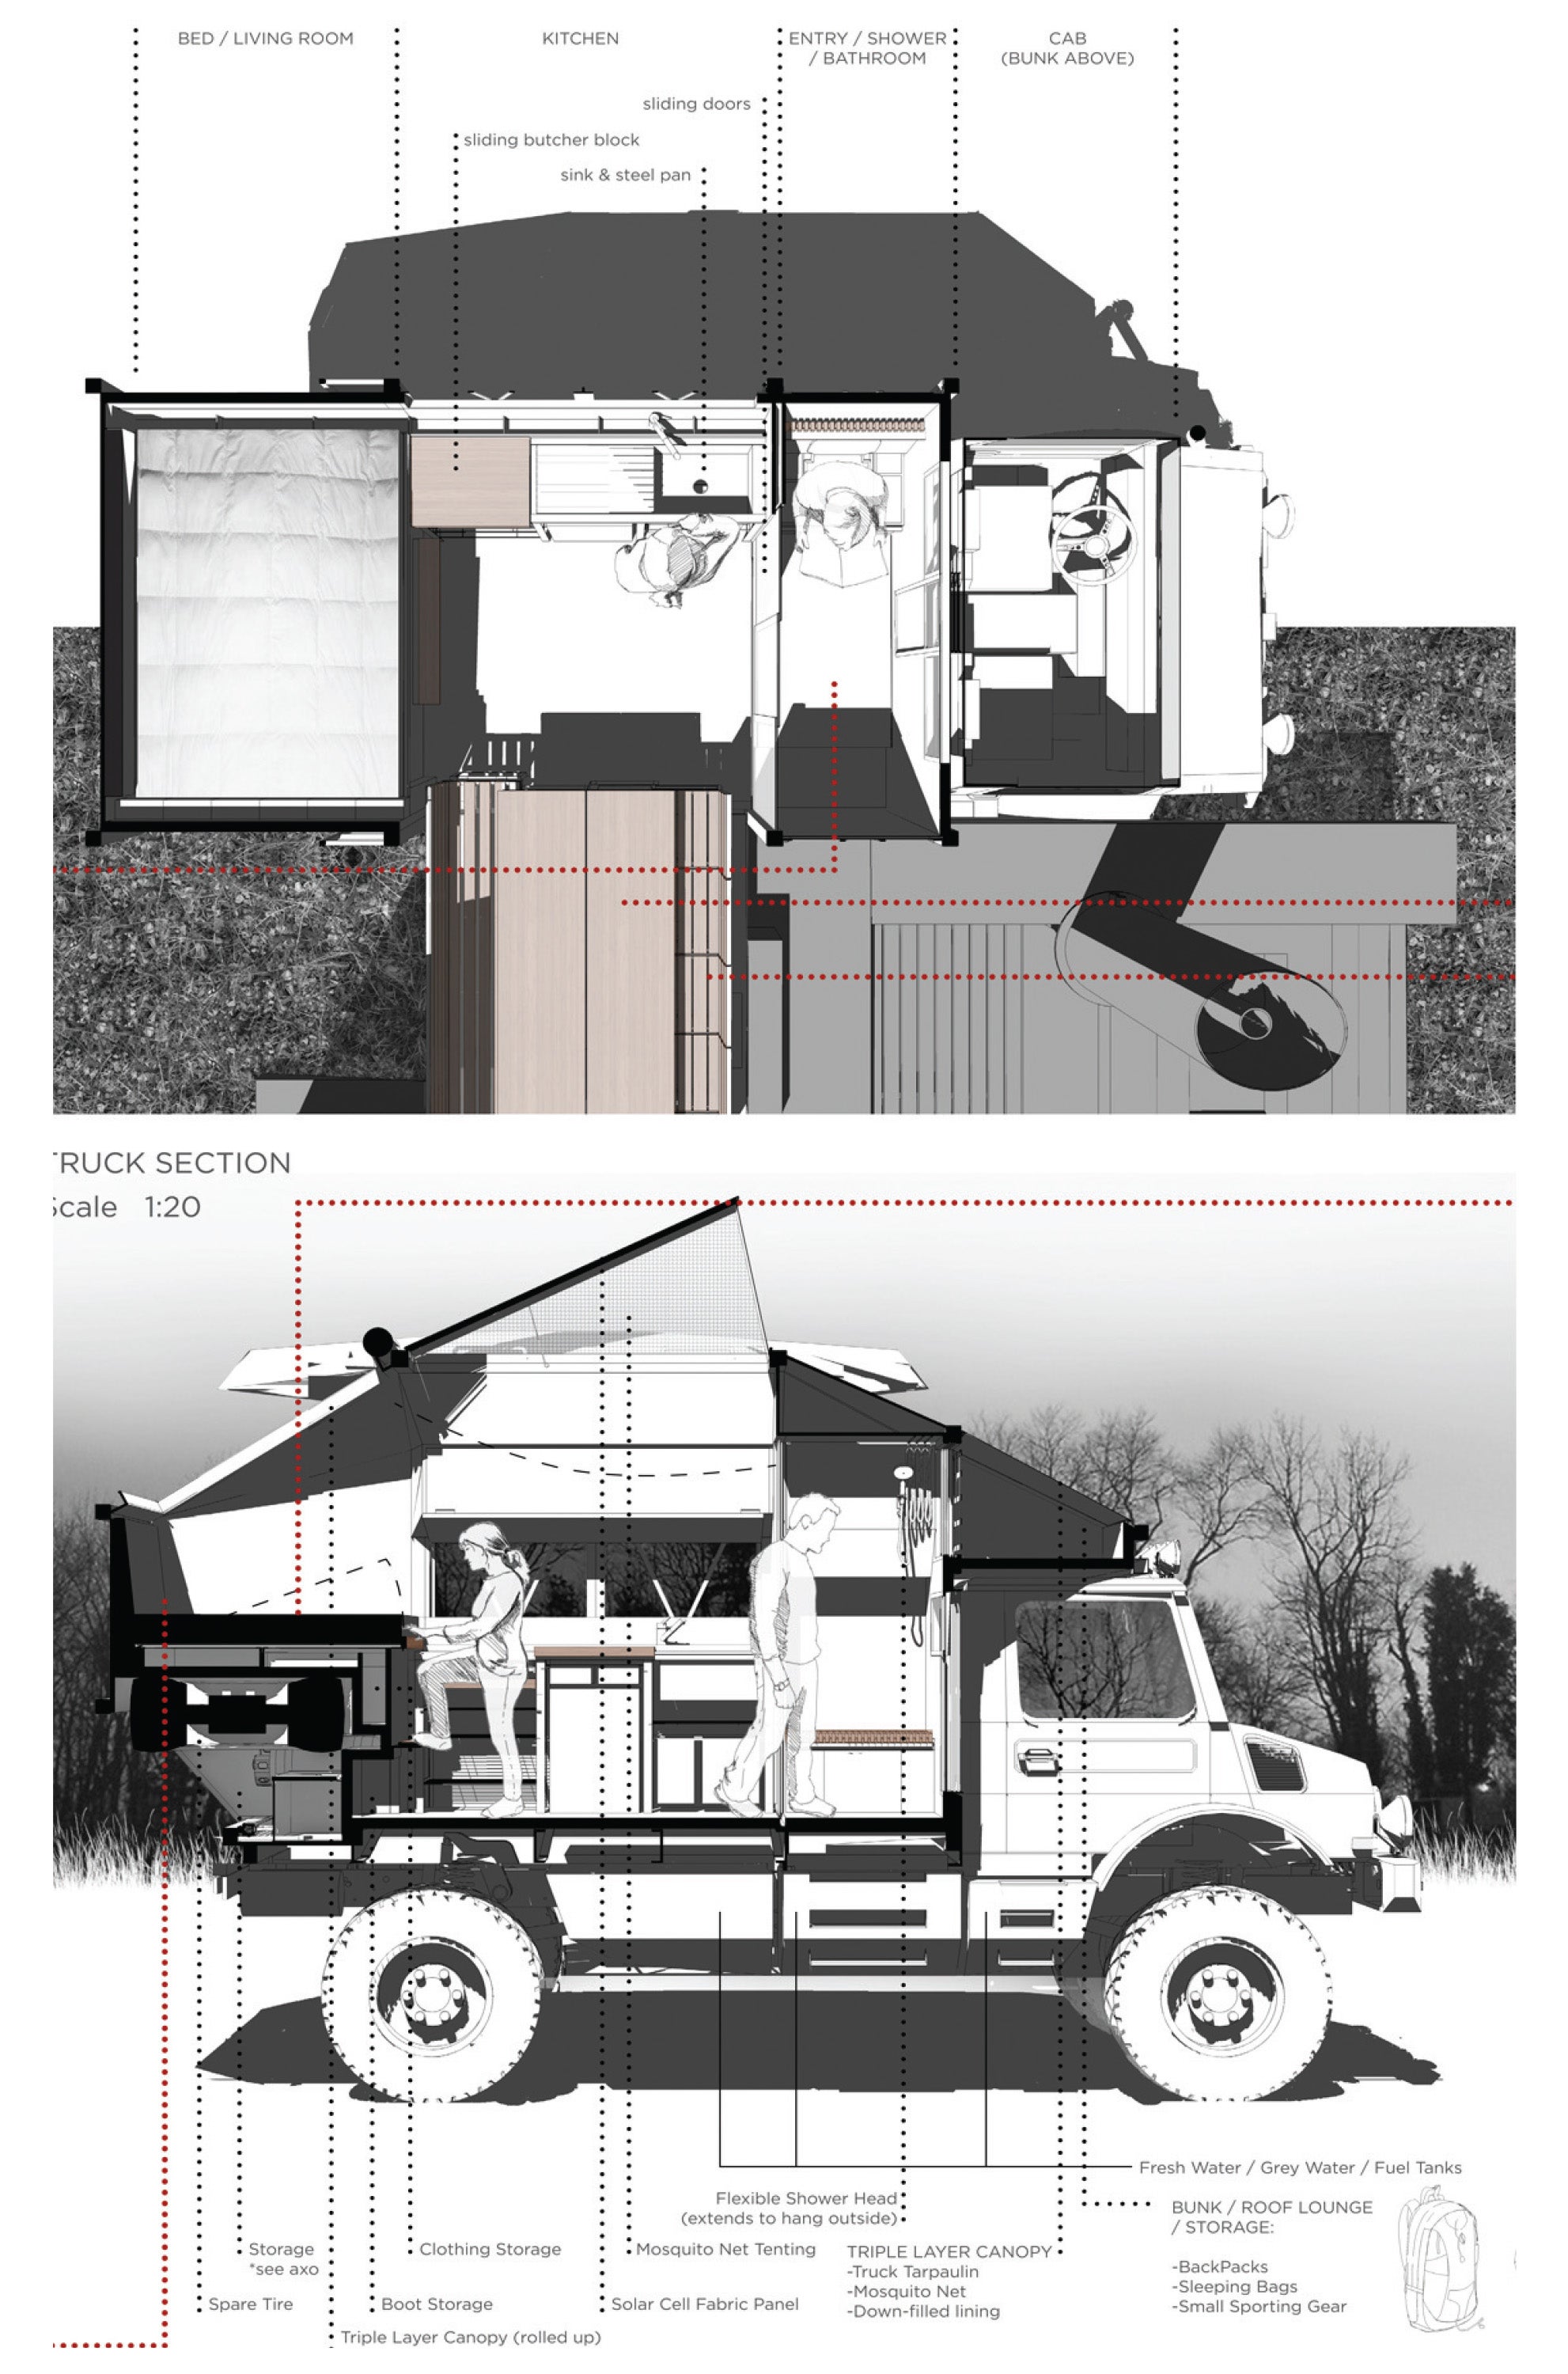 Two sectioned drawings/diagrams of a space made for work and live on the cargohold of a truck.